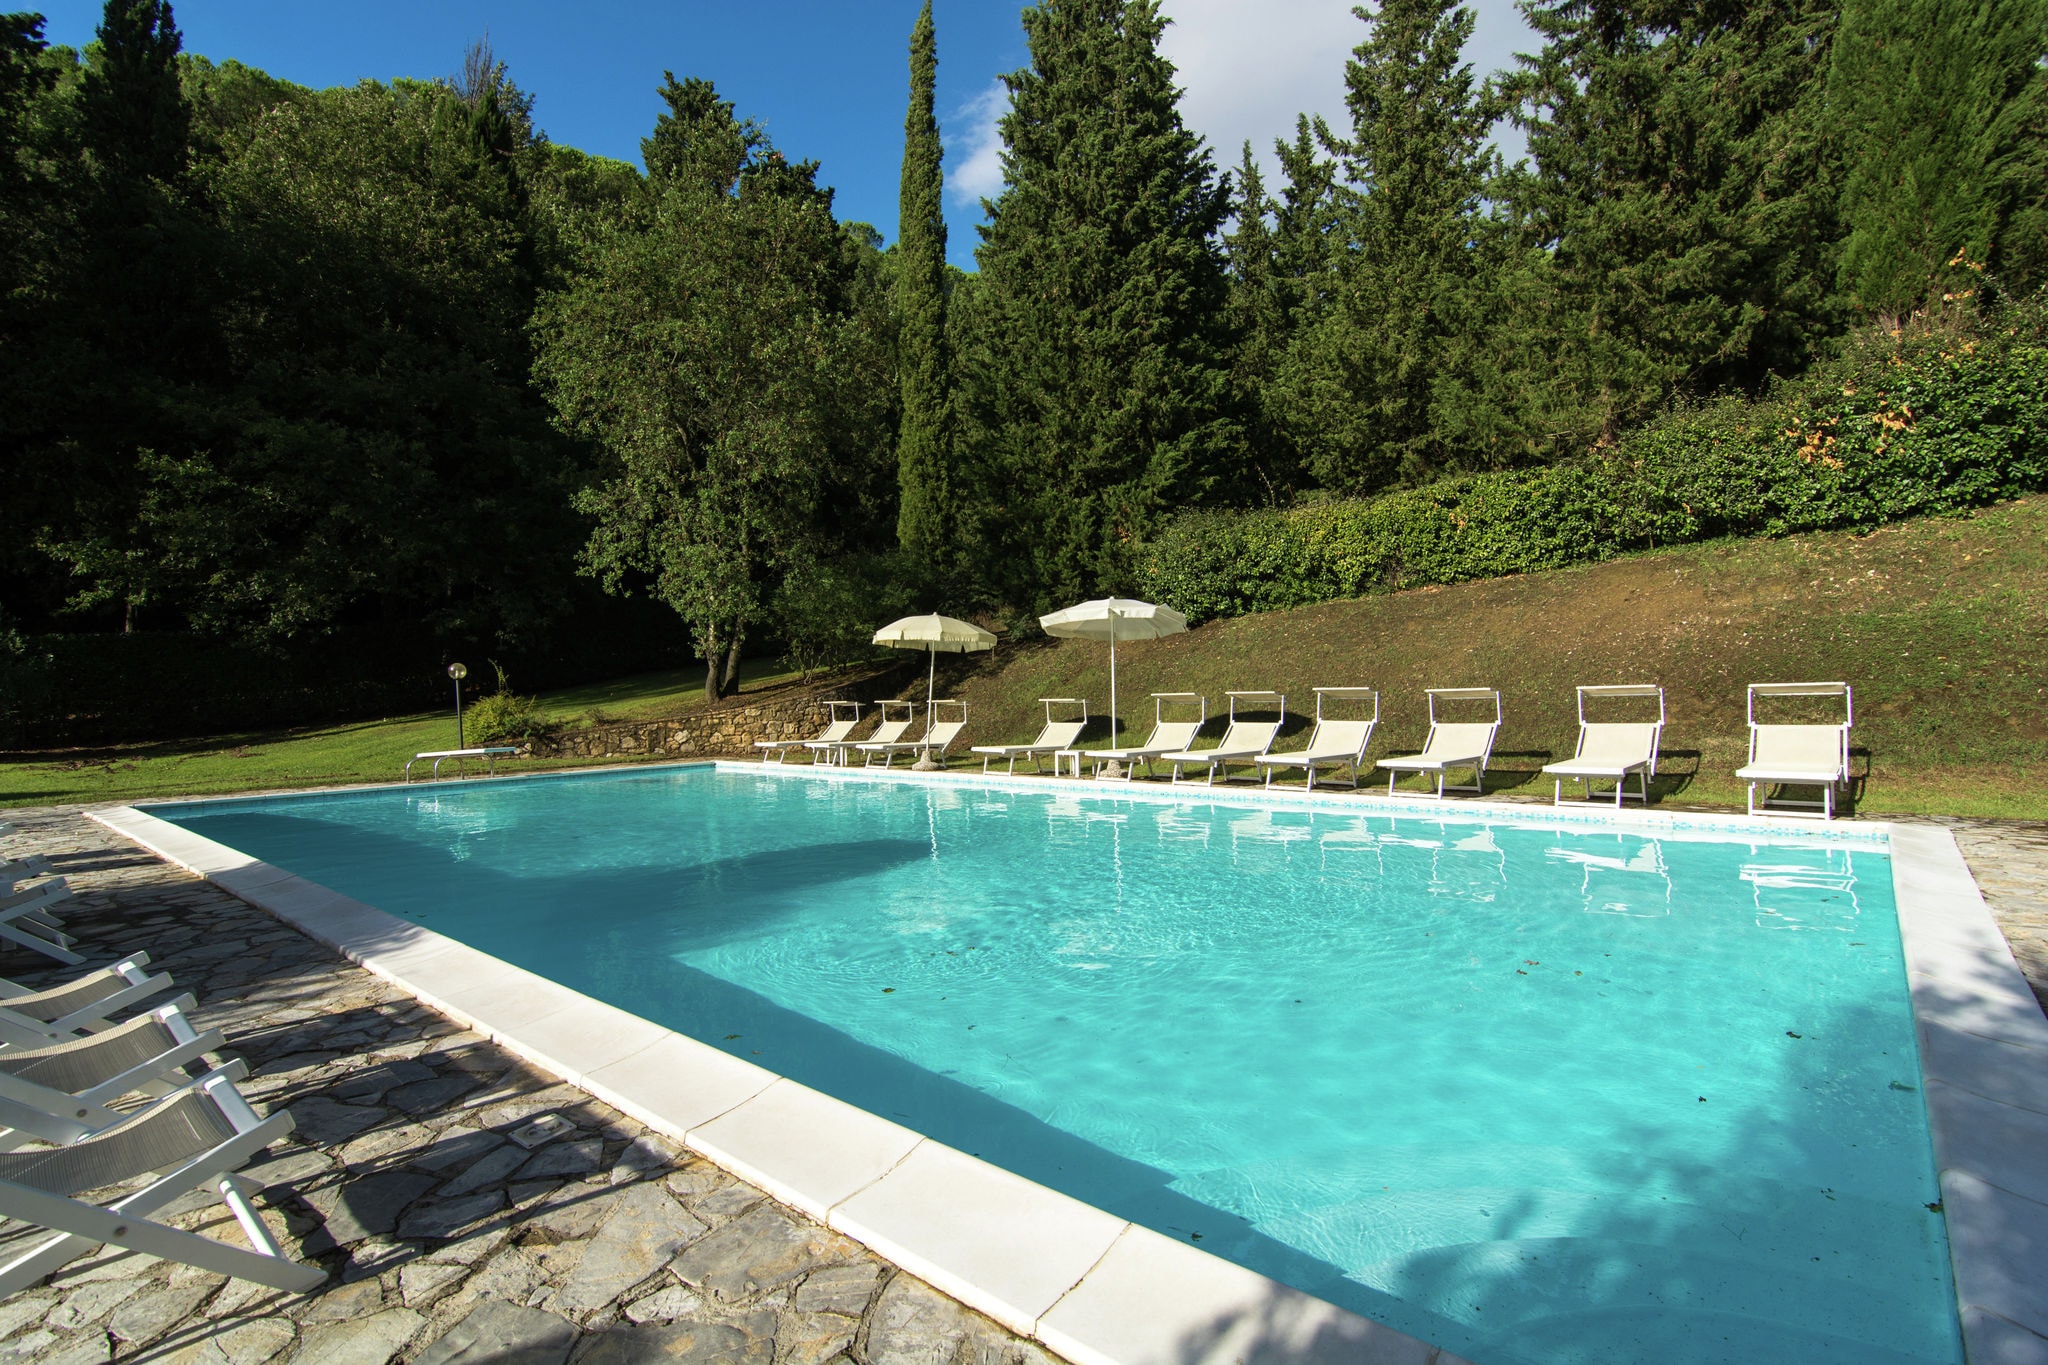 A beautiful Tuscan farmhouse and a large swimming pool and relaxing